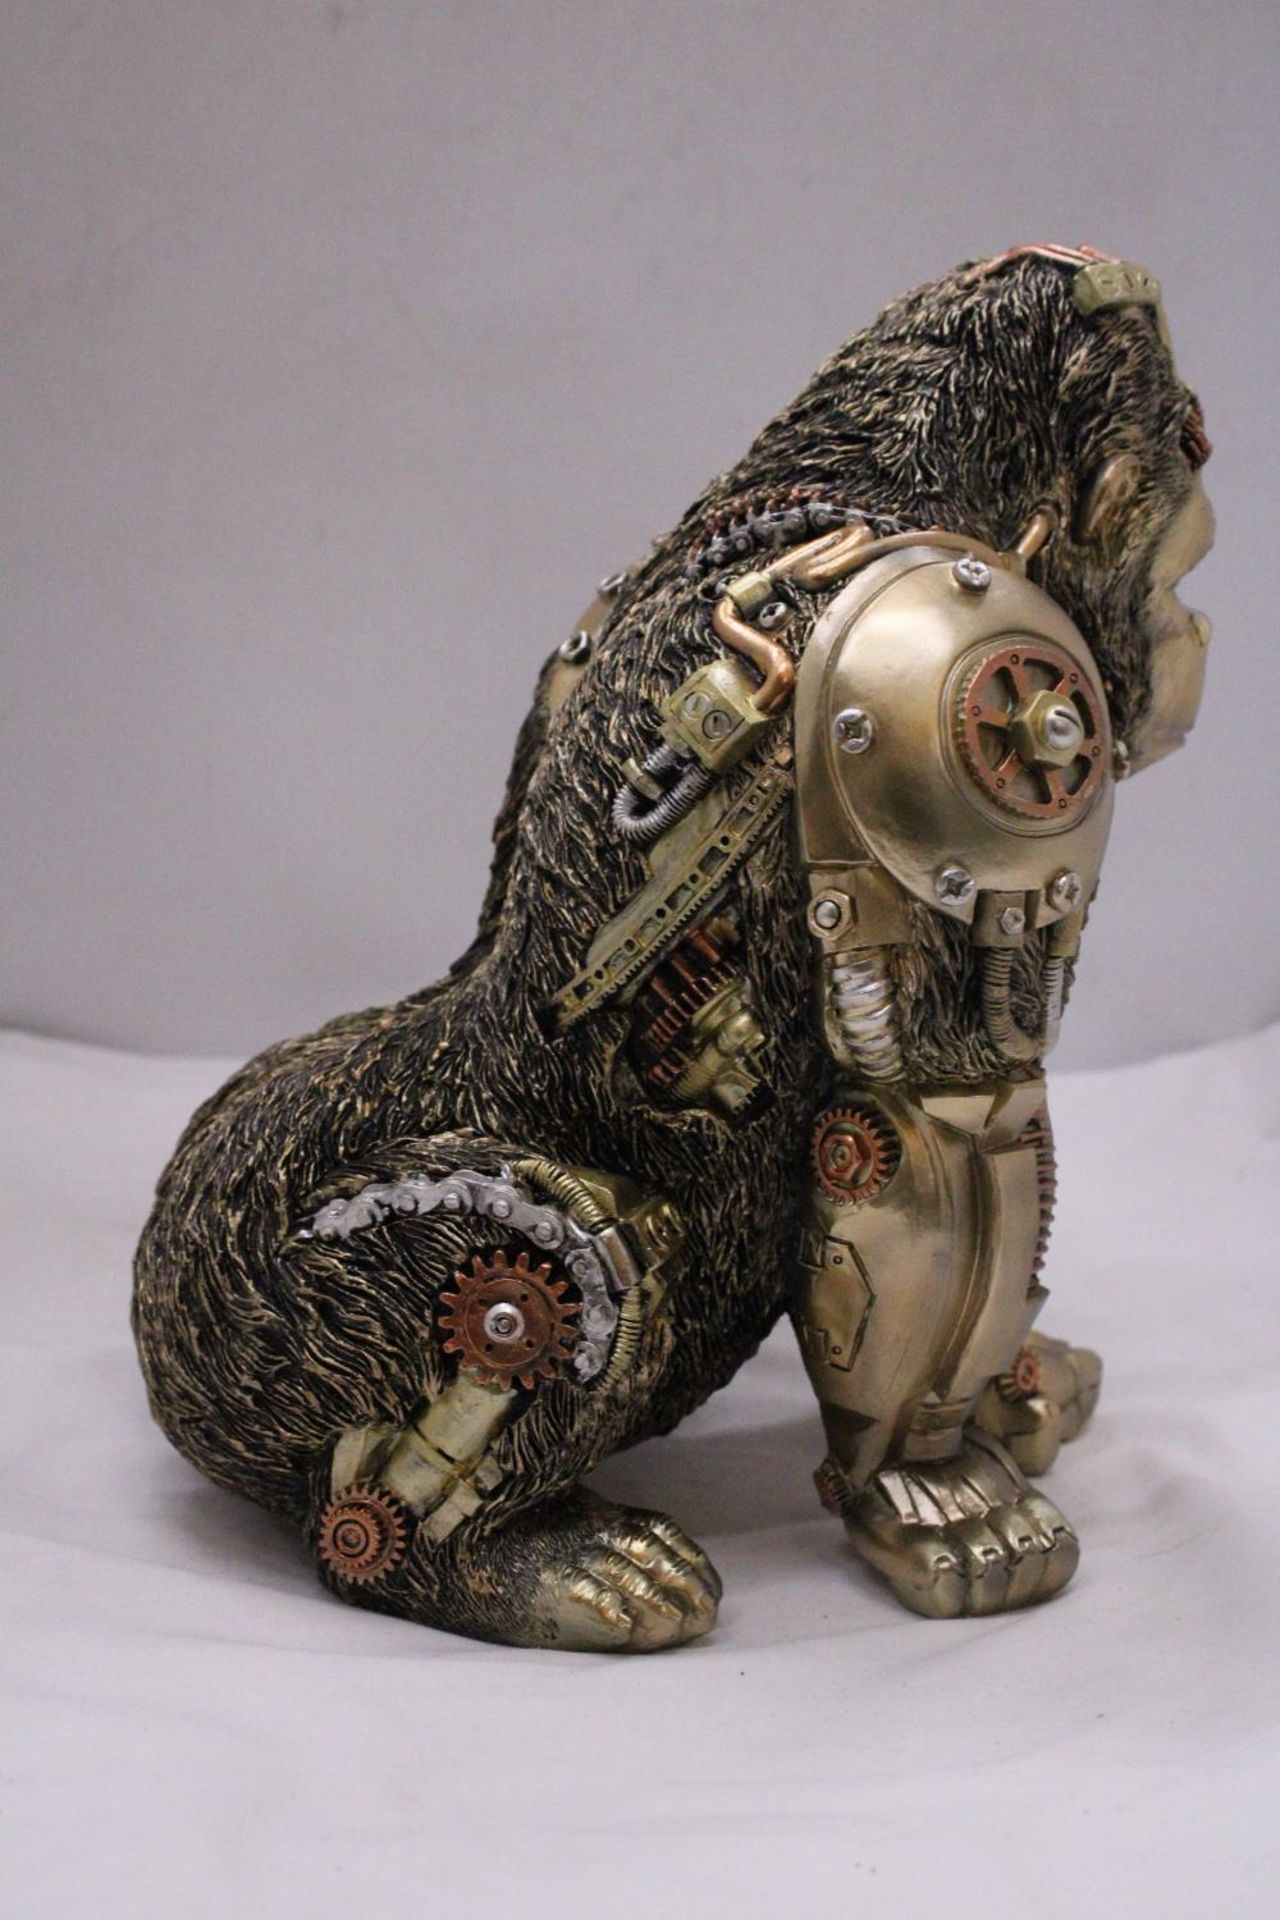 A MECHANICAL STYLE GORILLA - Image 3 of 5